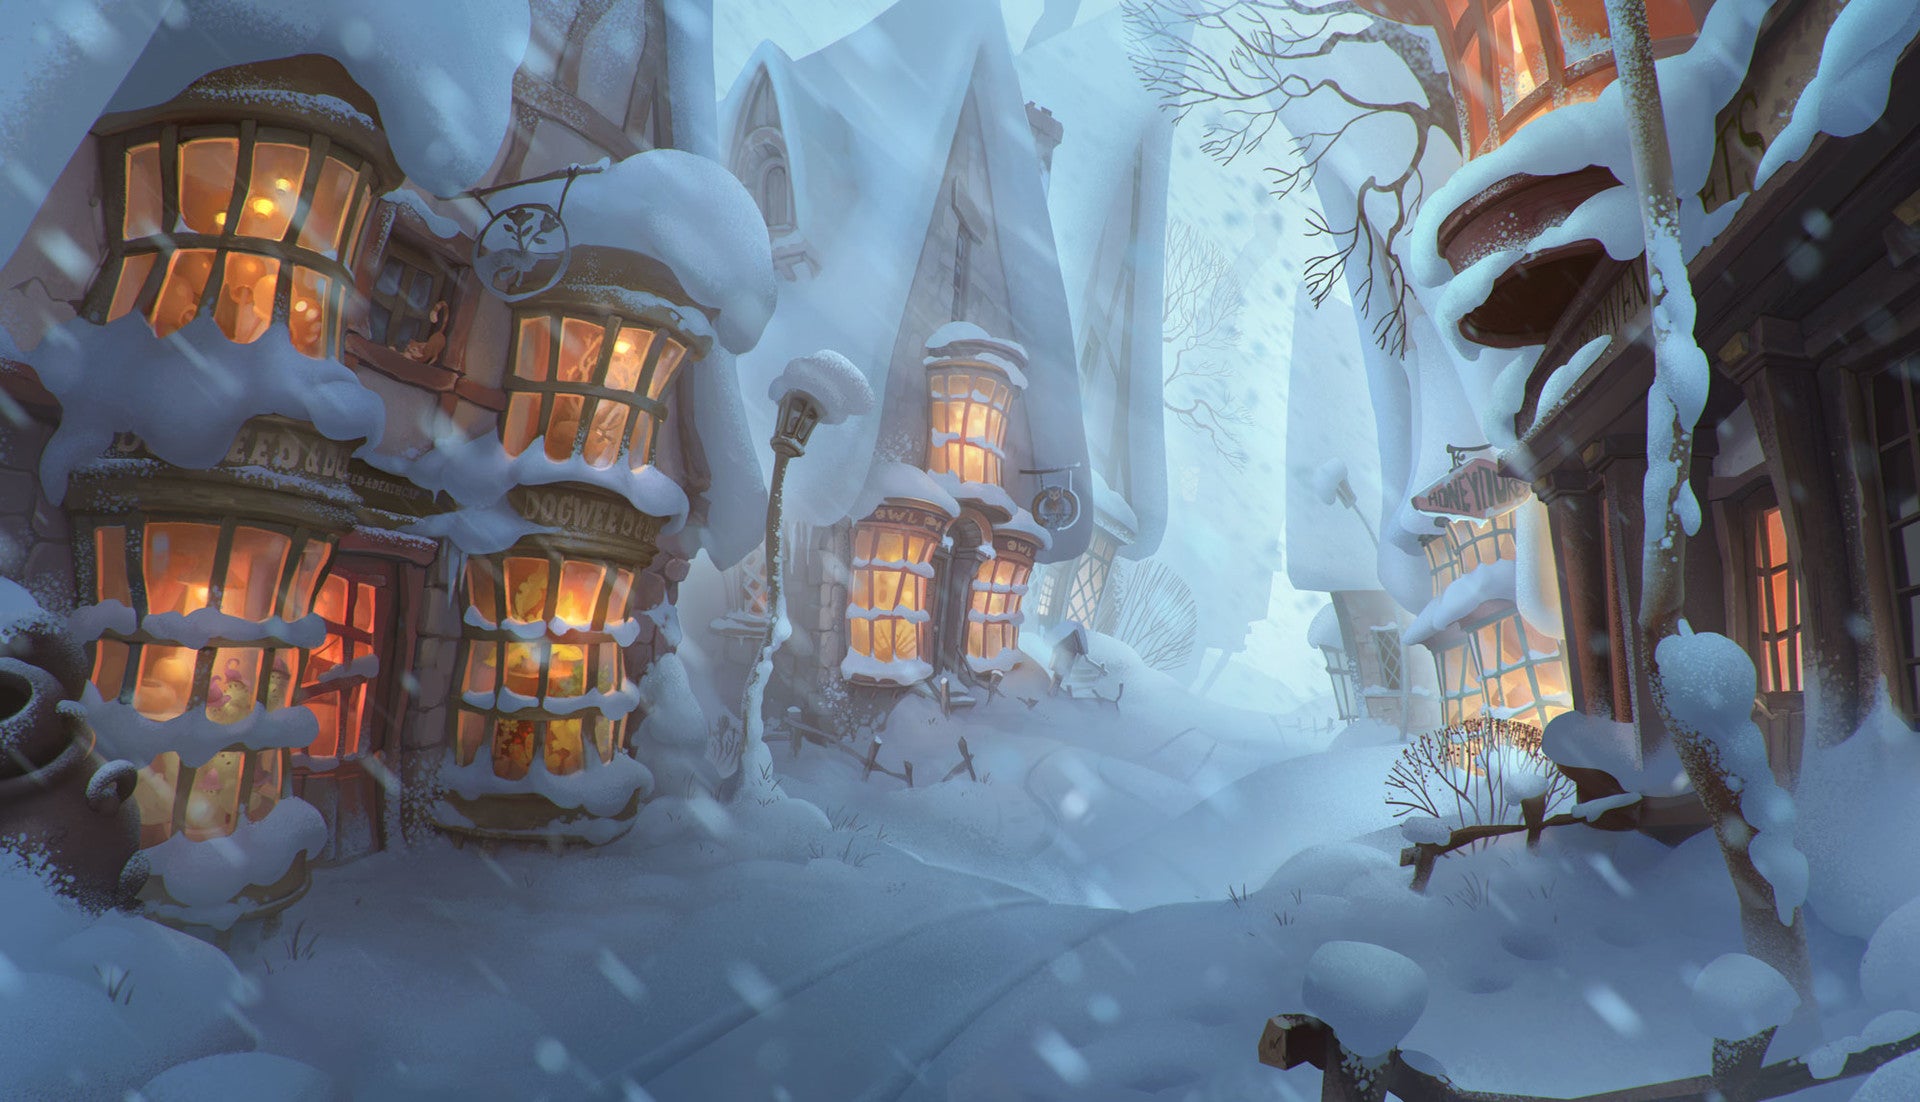 Winter is coming to Hogsmeade!